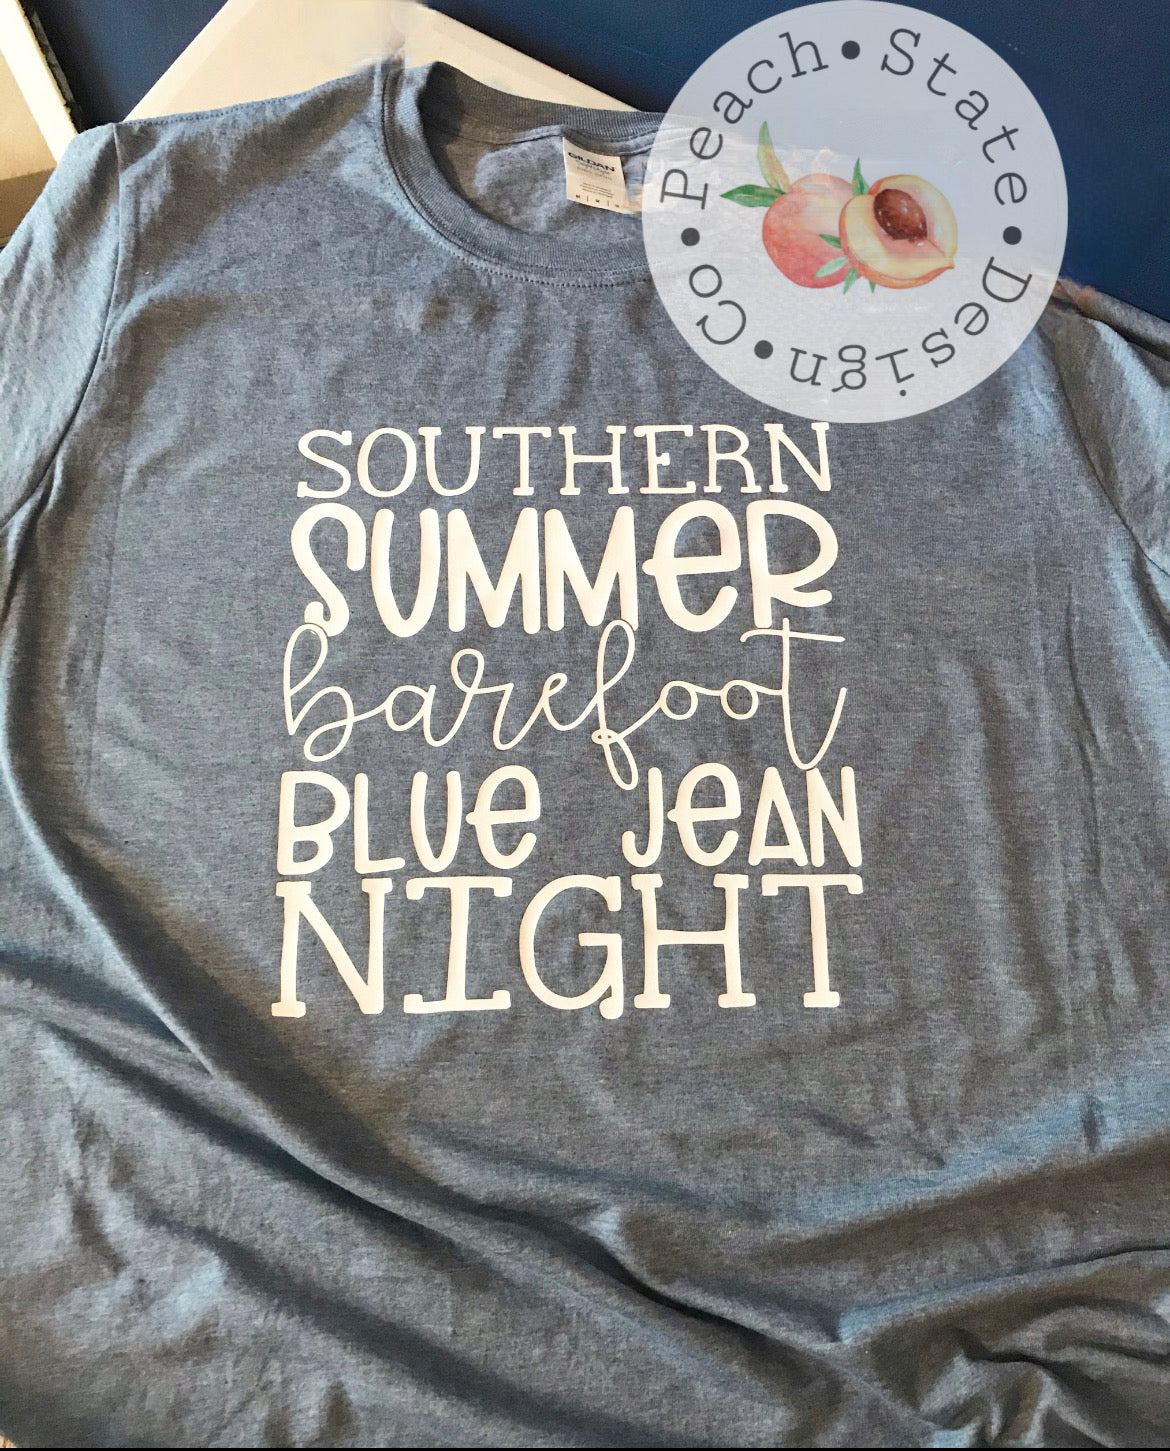 Southern Summer Barefoot Blue Jean Night